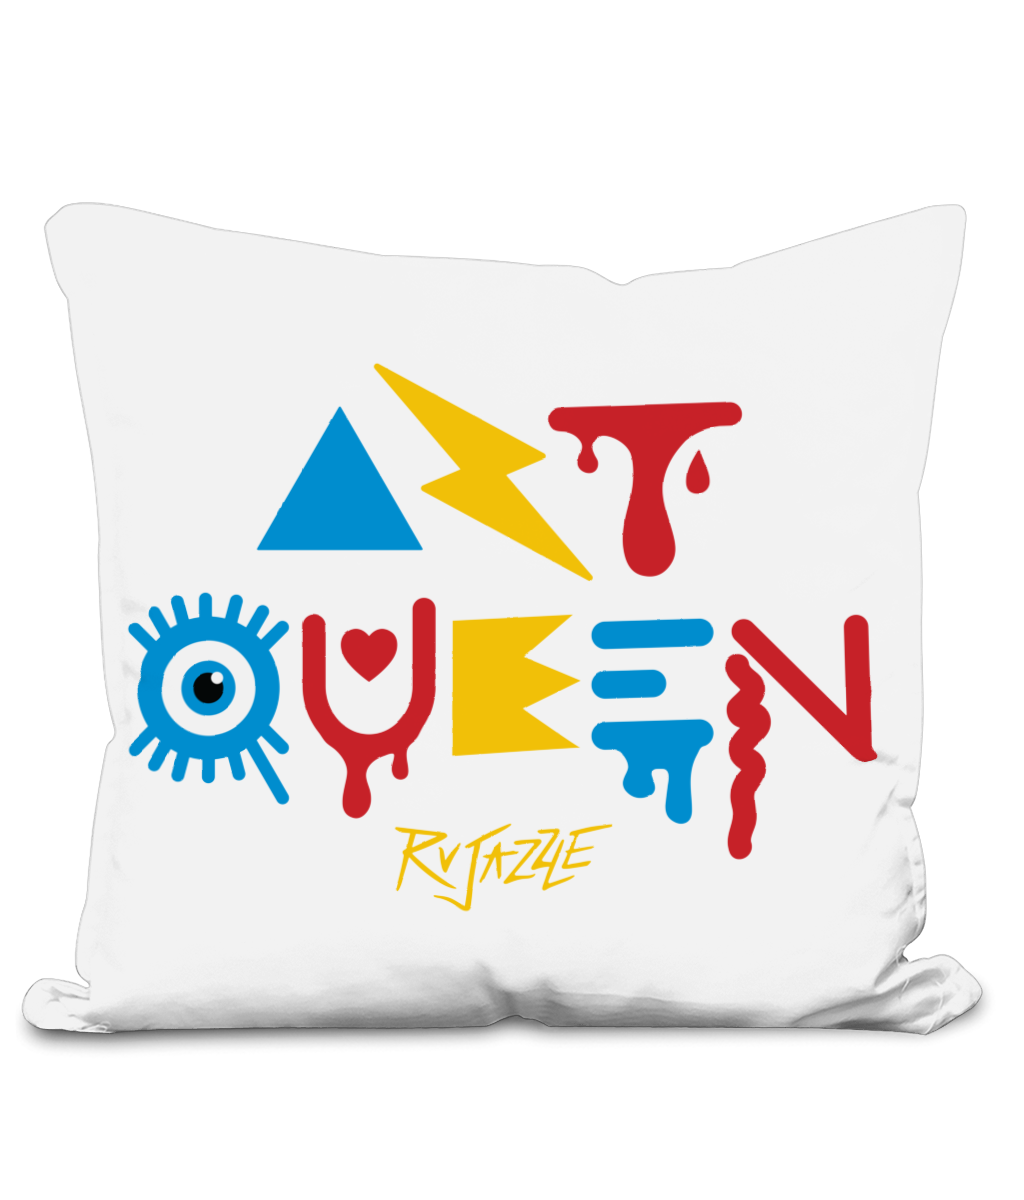 Rujazzle - Art Queen Cushion Cover - SNATCHED